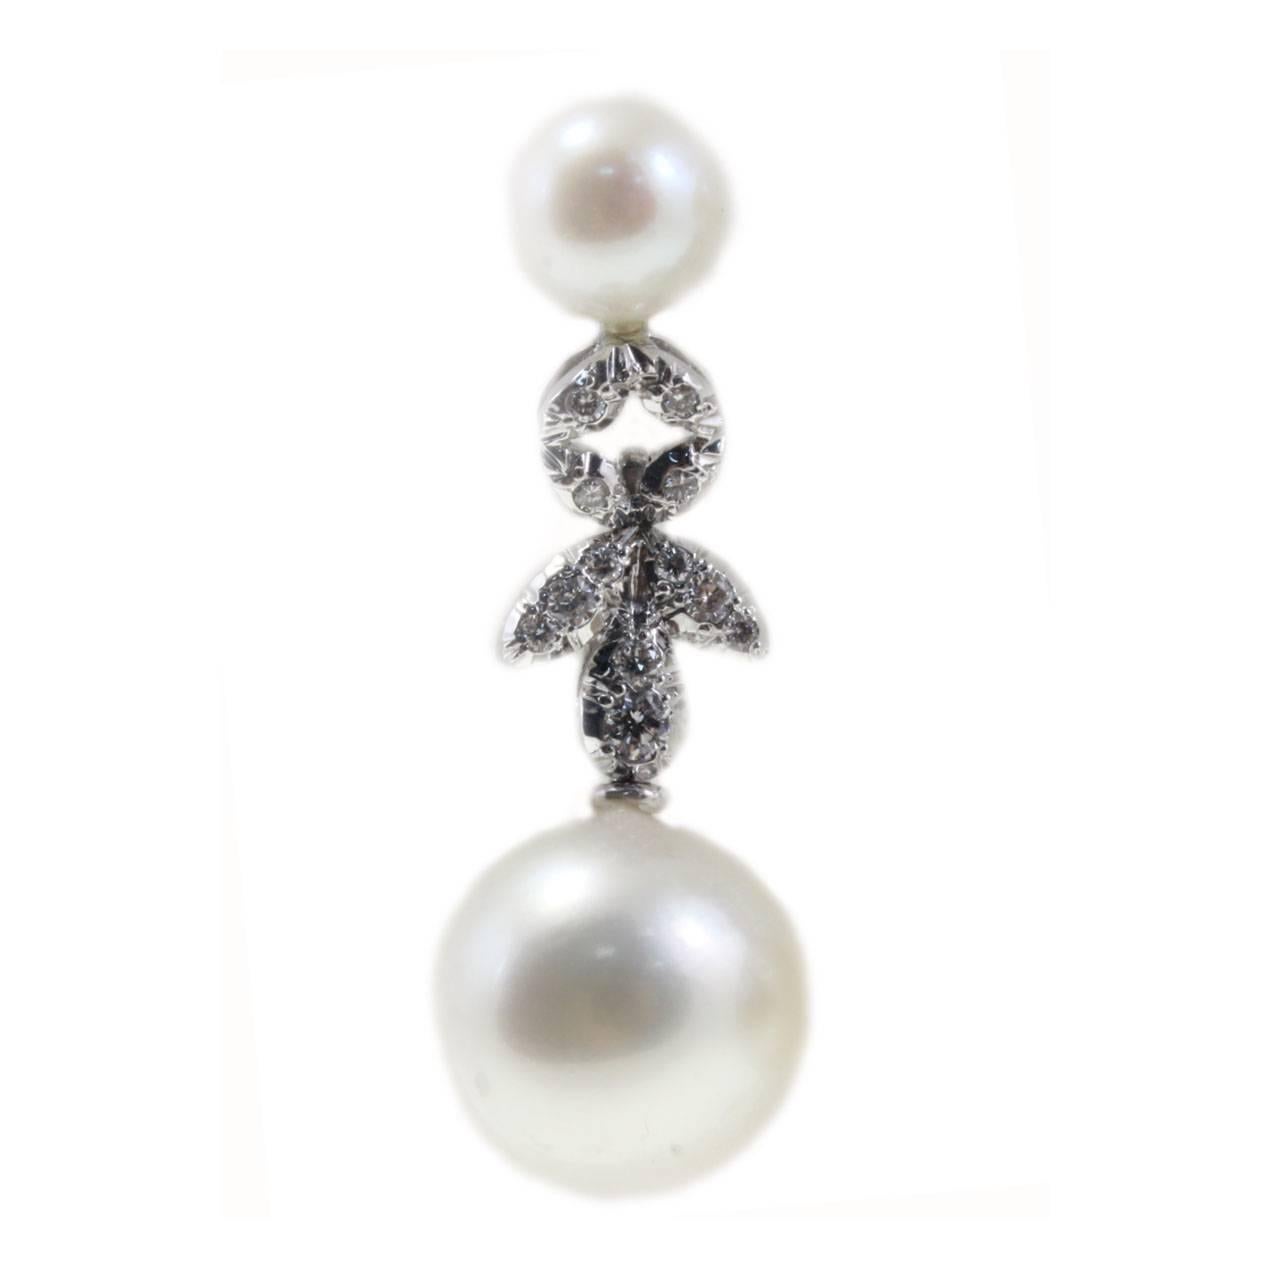 Fascinating dangle earrings, made with a unique design in 14K white gold, on them encrusted shiny diamonds linking the 2 pearls, one on top and one on bottom of them.
Tot weight 9.4 g both earrings, 4.7 g single one
Diamonds 0.33 ct
Pearls 6.10 g,